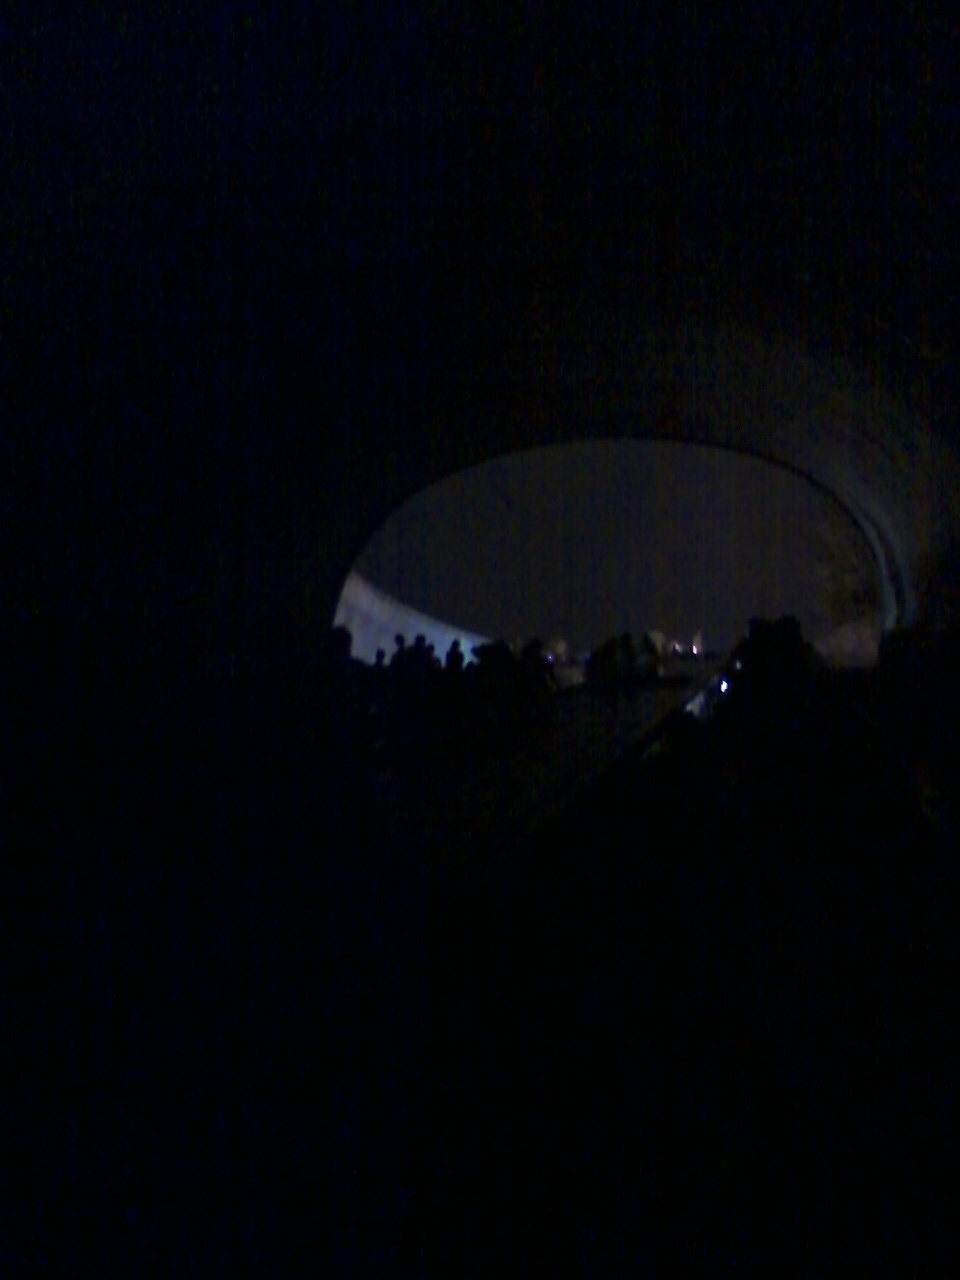 08/04/2011-
WMATA/DC Metro, darkness at DuPont Circle station due to only one overhead
light being in working order. For further details, please visit
www.wirelessnotes.org.